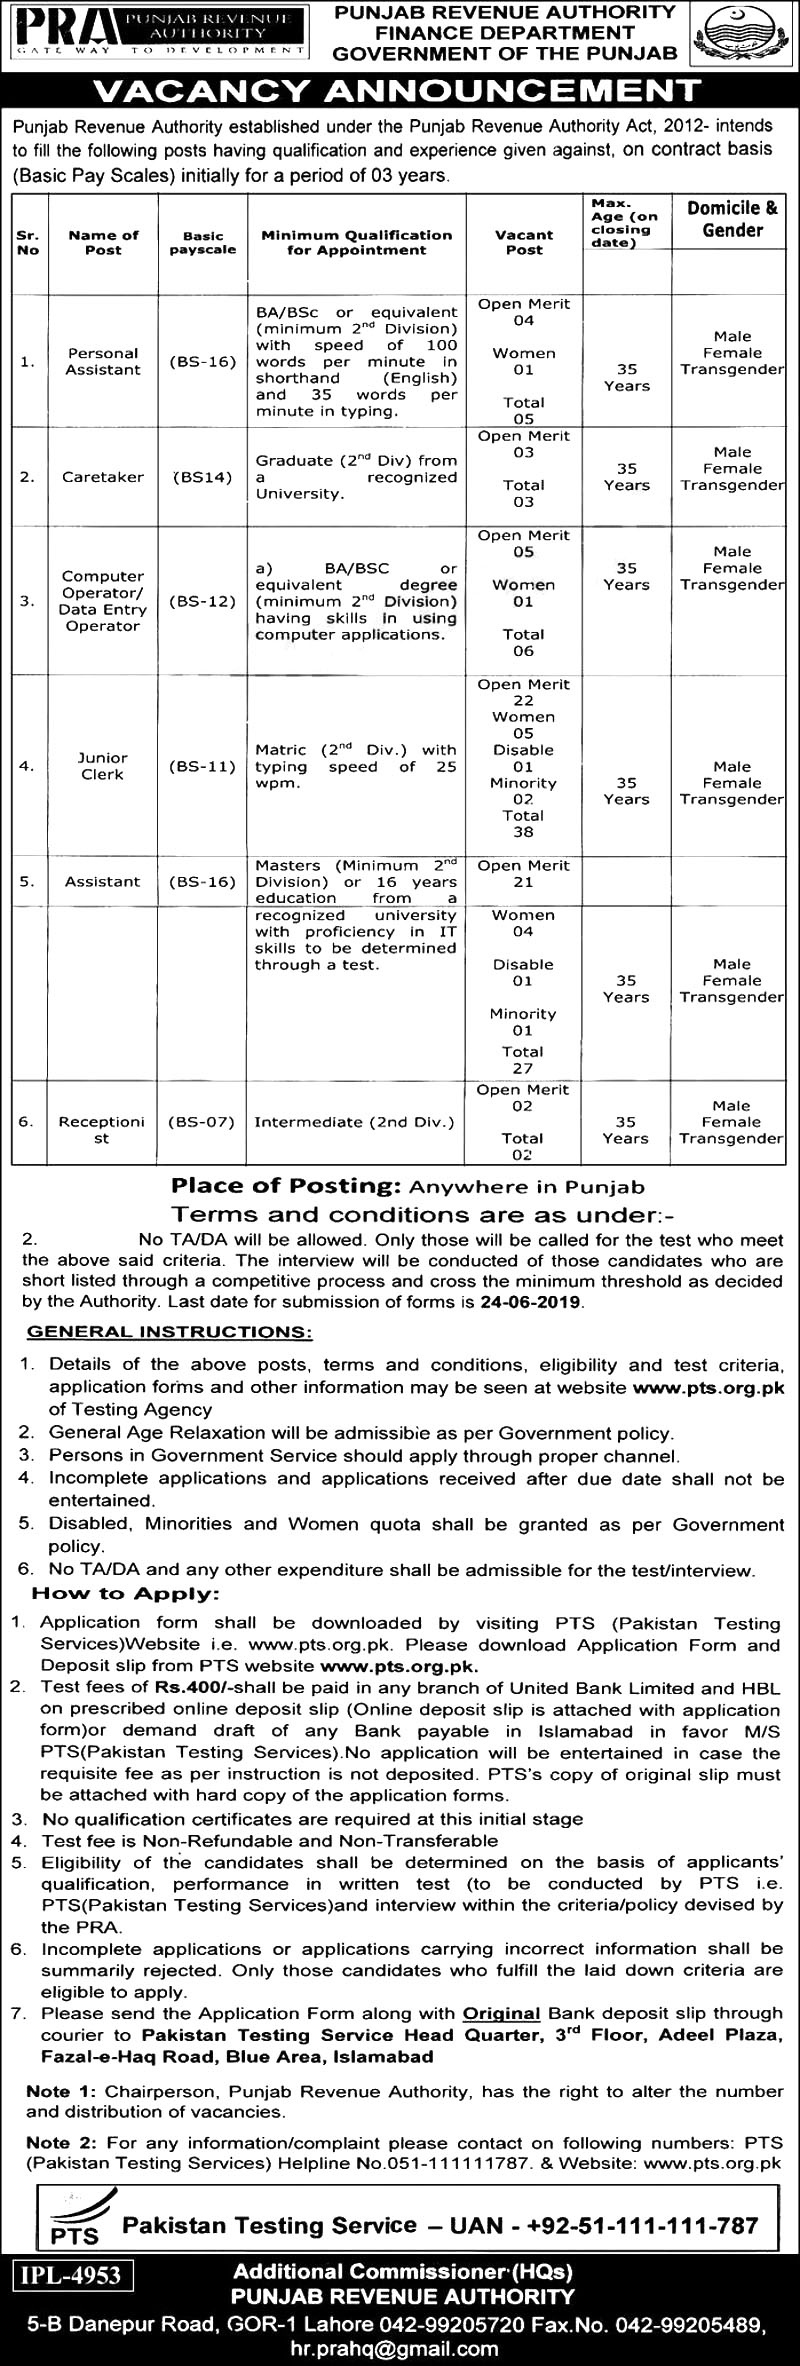 Get a Latest Jobs In Punjab Revenue Authority 2019